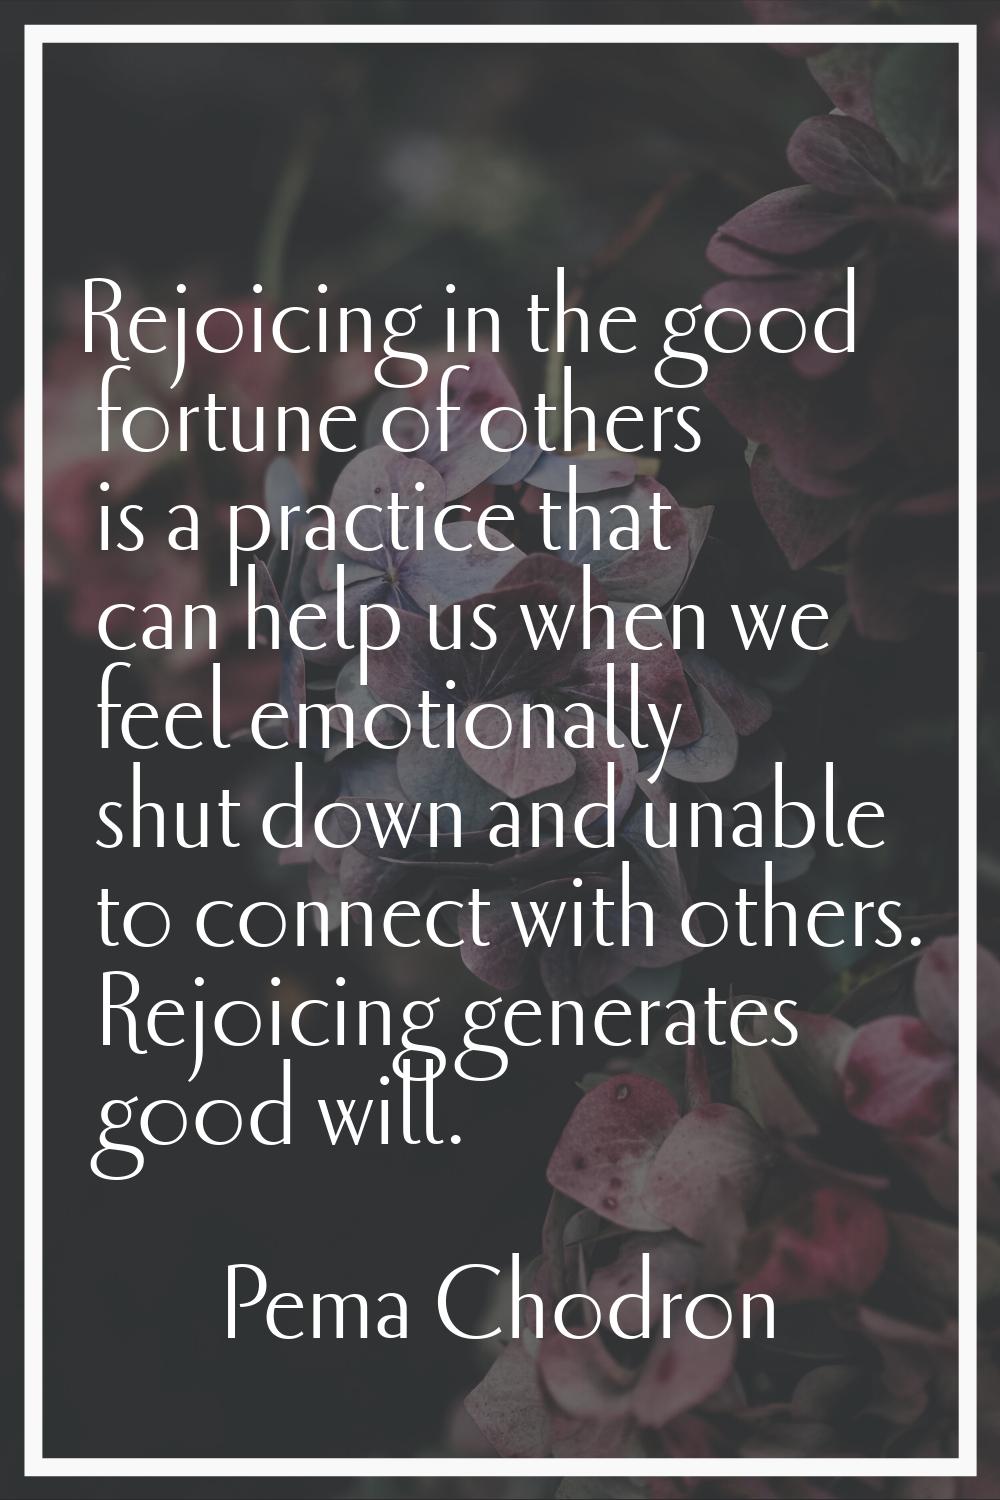 Rejoicing in the good fortune of others is a practice that can help us when we feel emotionally shu